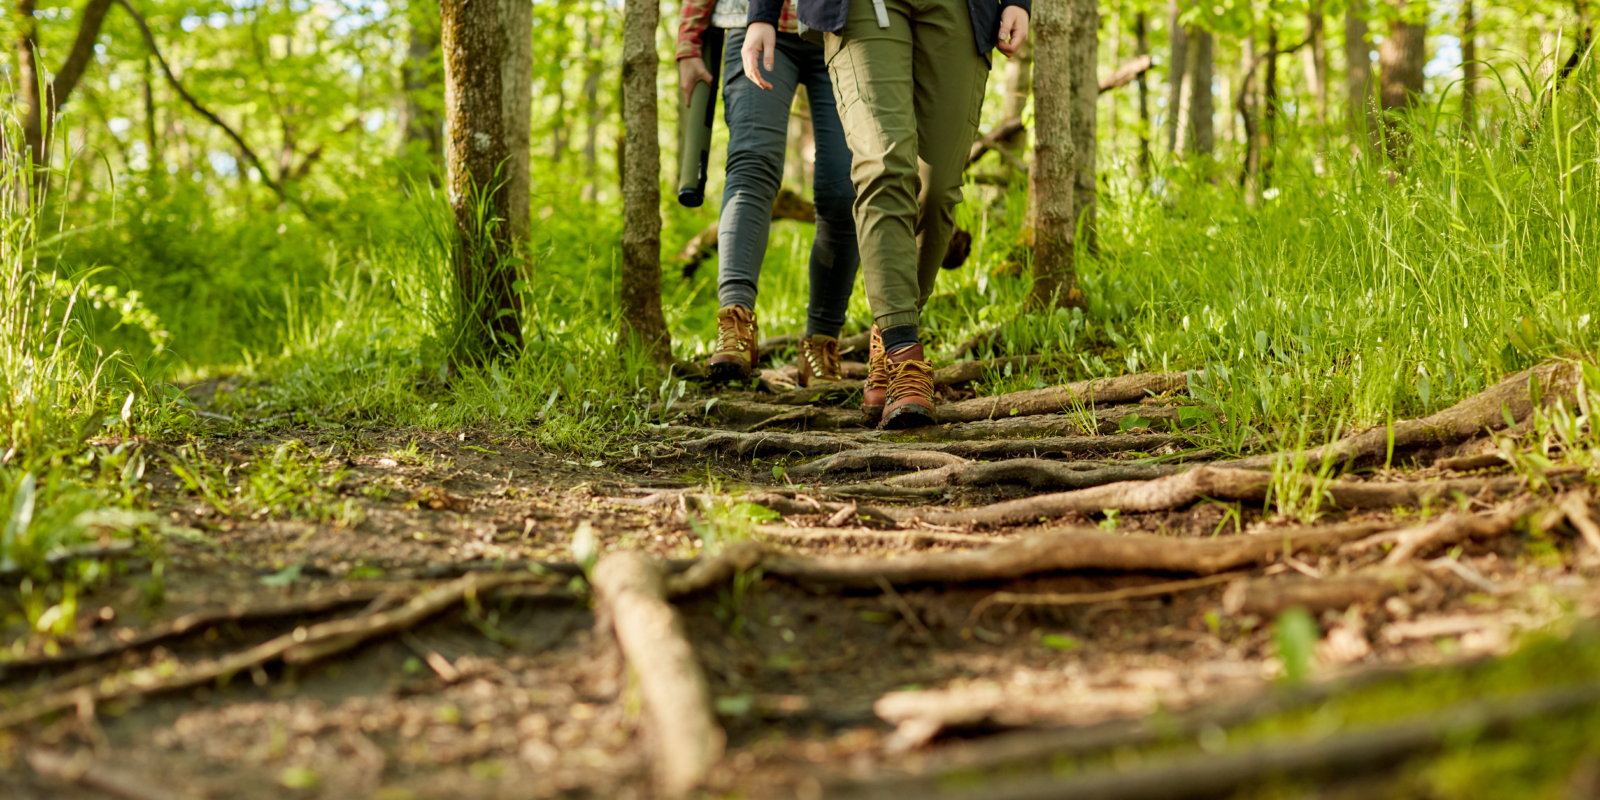 Two women hiking along a forest footpath in a low angle view of their approaching legs over roots and branches